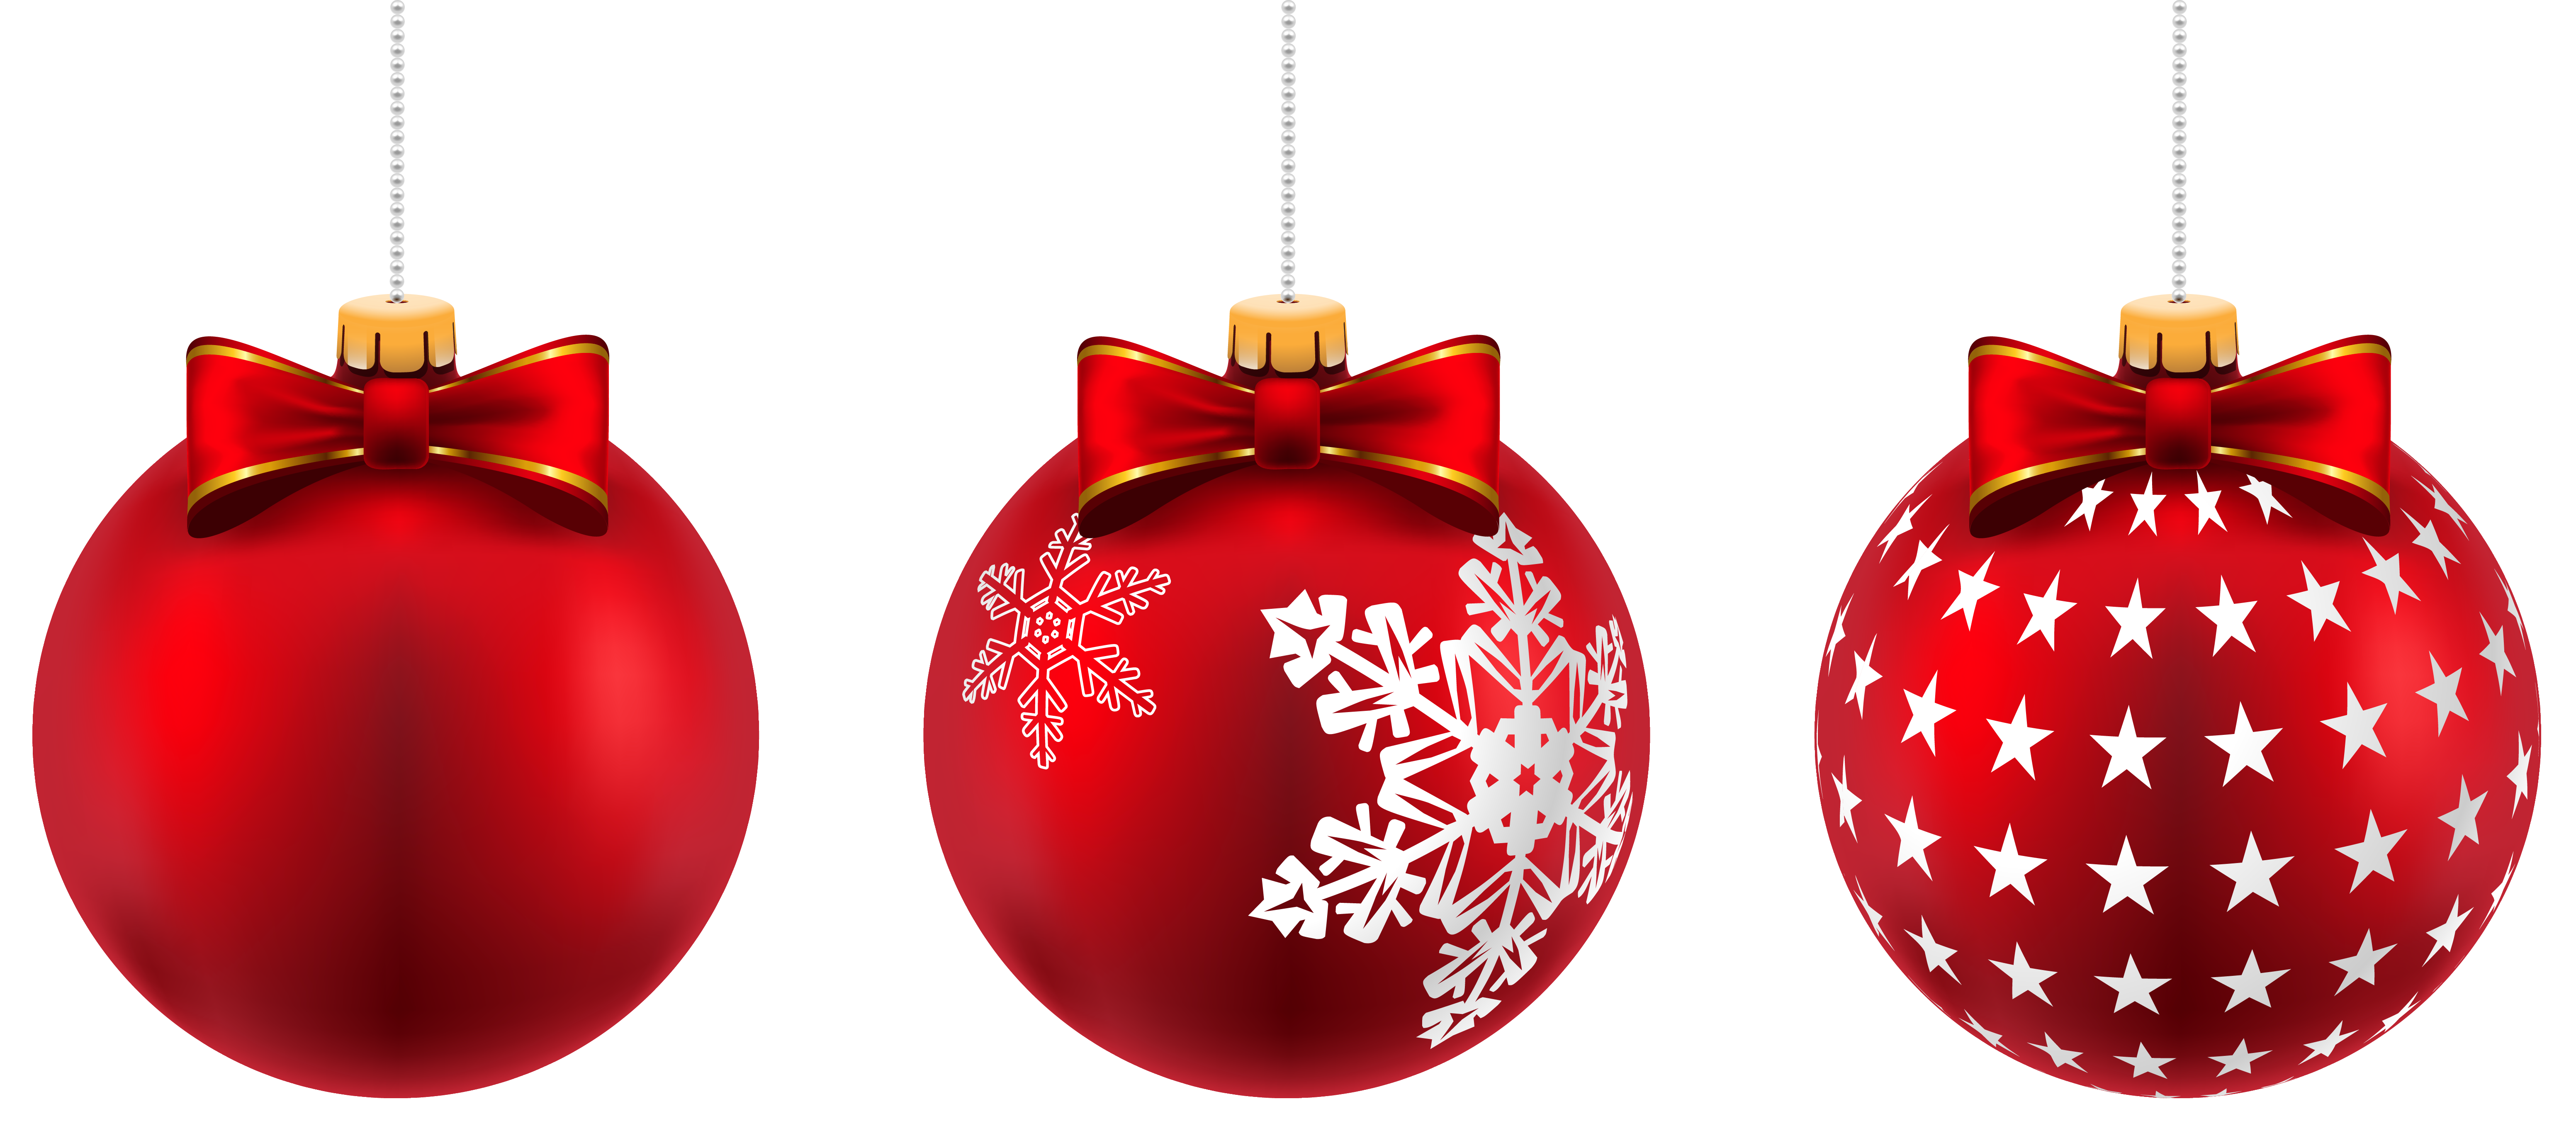 Red Christmas Balls PNG Clip-Art Image​ | Gallery Yopriceville - High-Quality Free and Transparent PNG Clipart